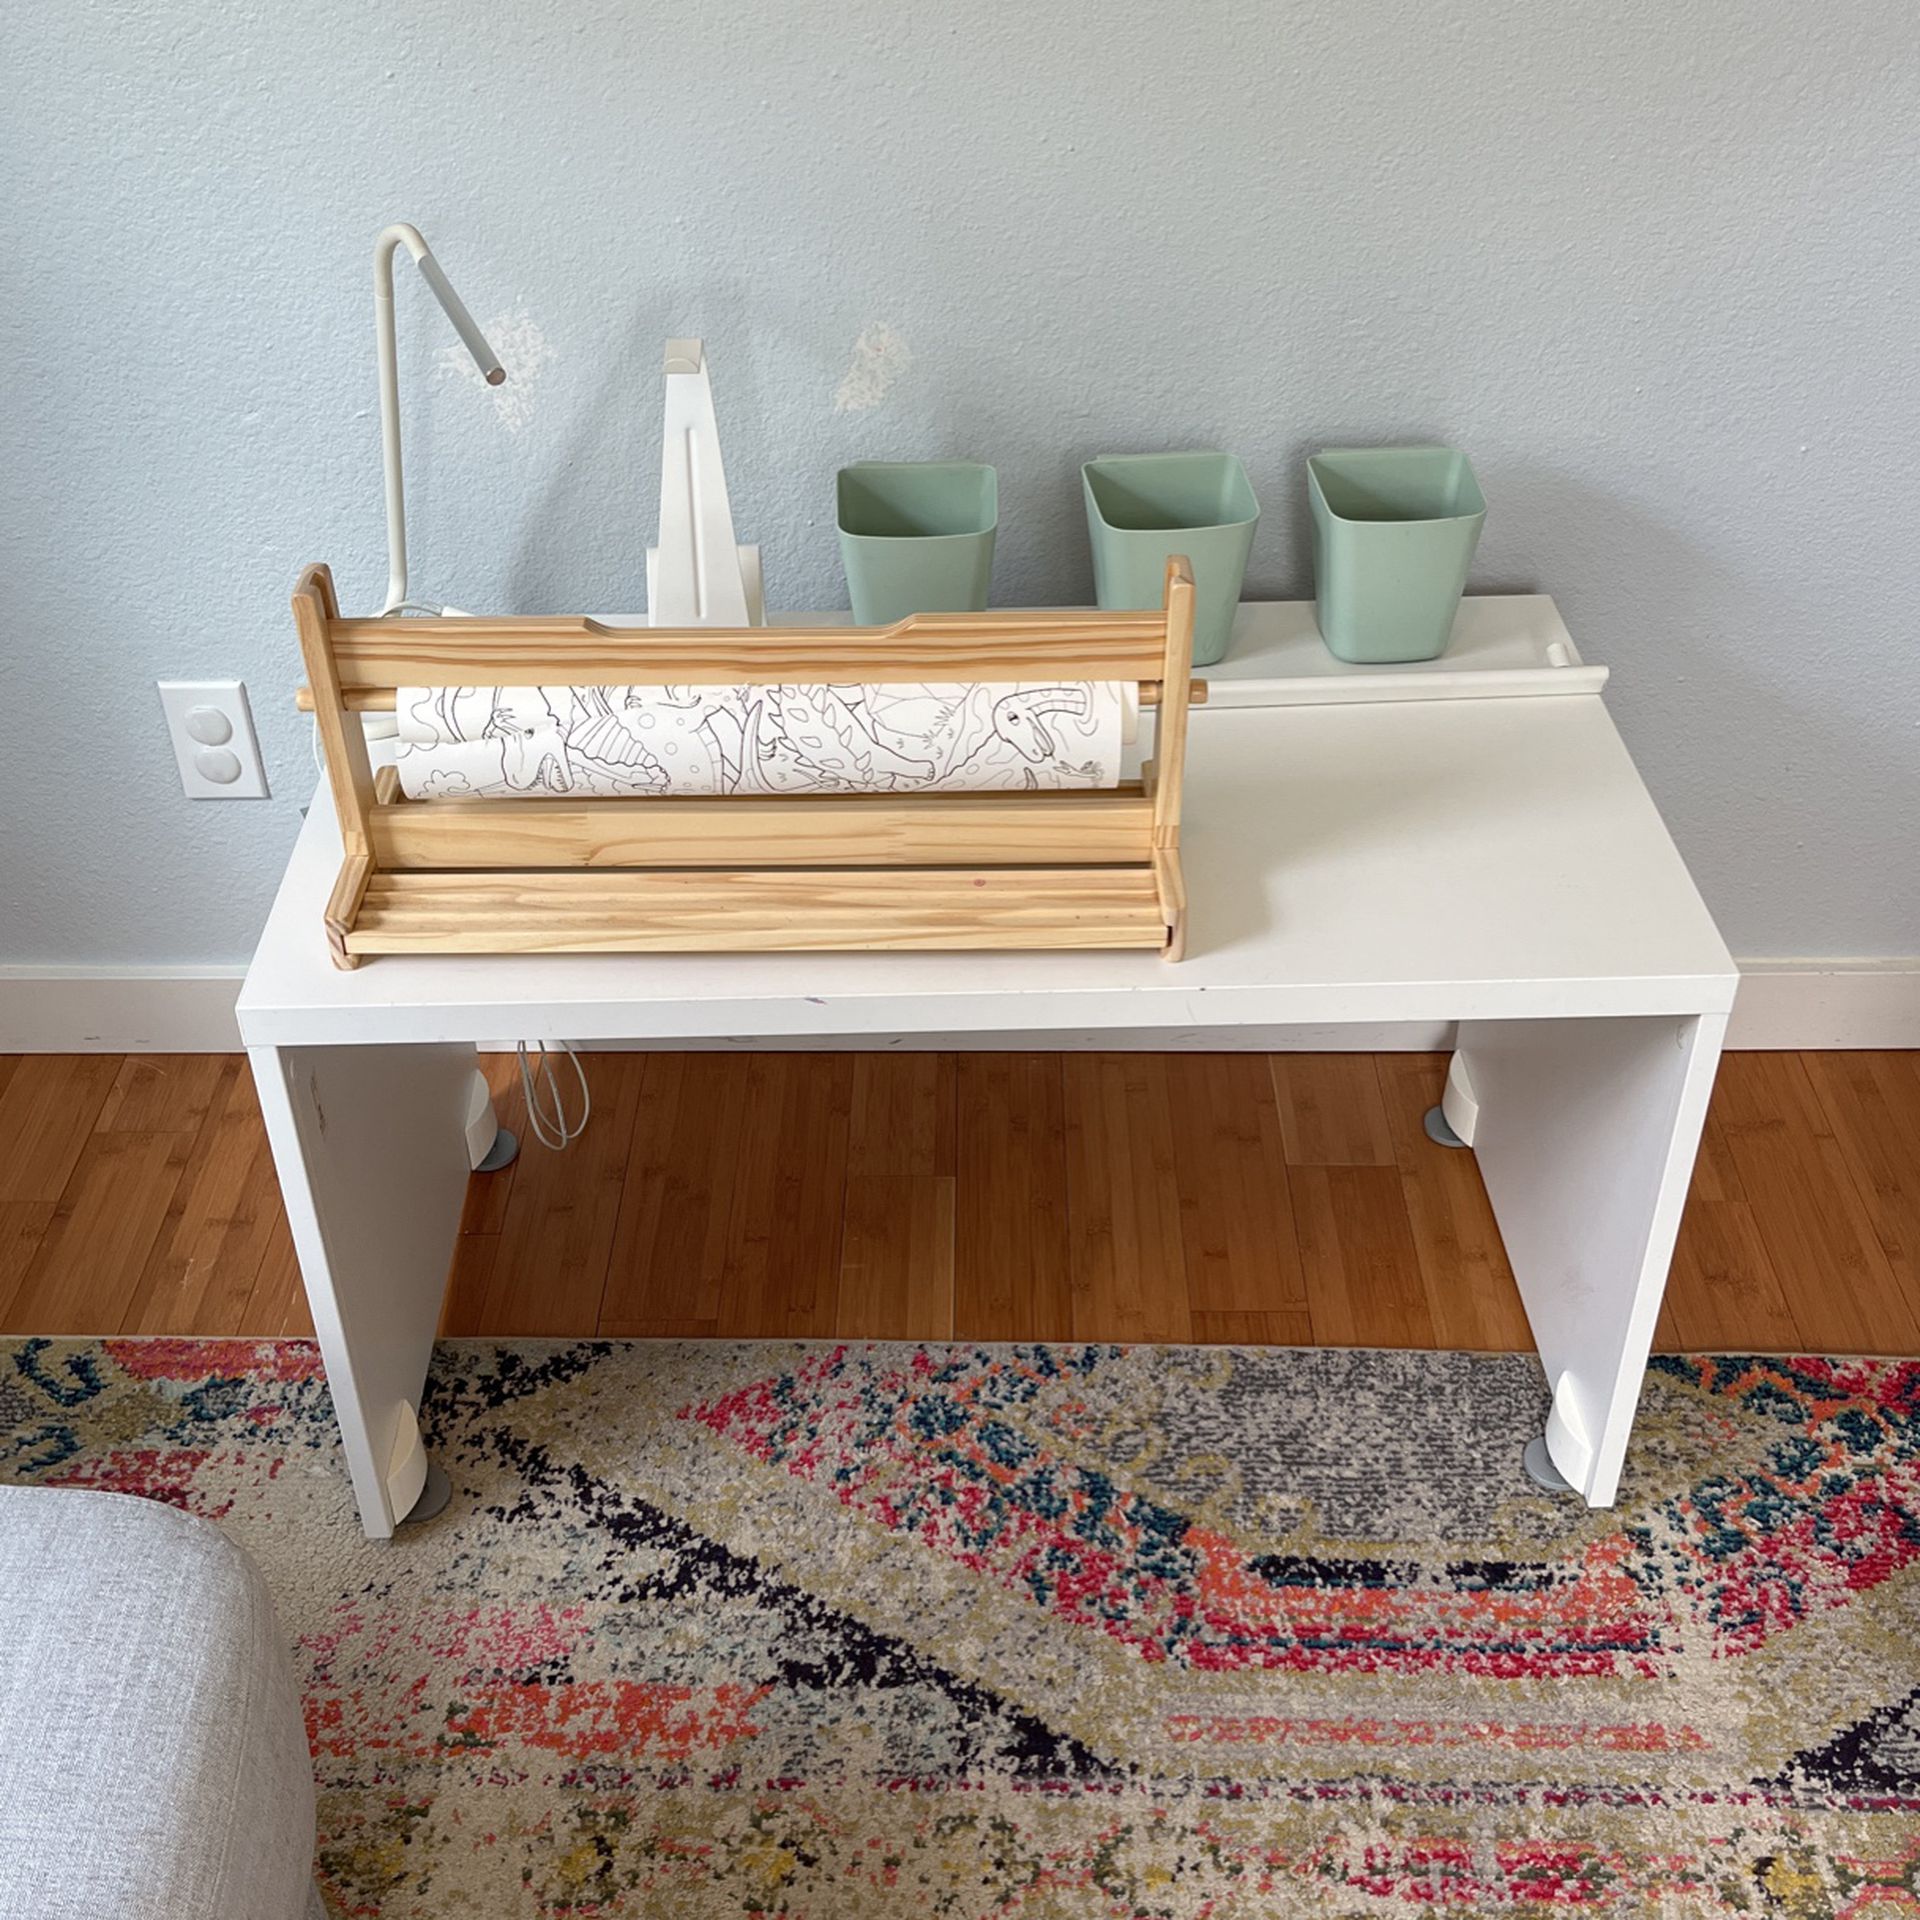 Ikea Smastad Desk & all Of Accessories Needed For A Kids Art Station